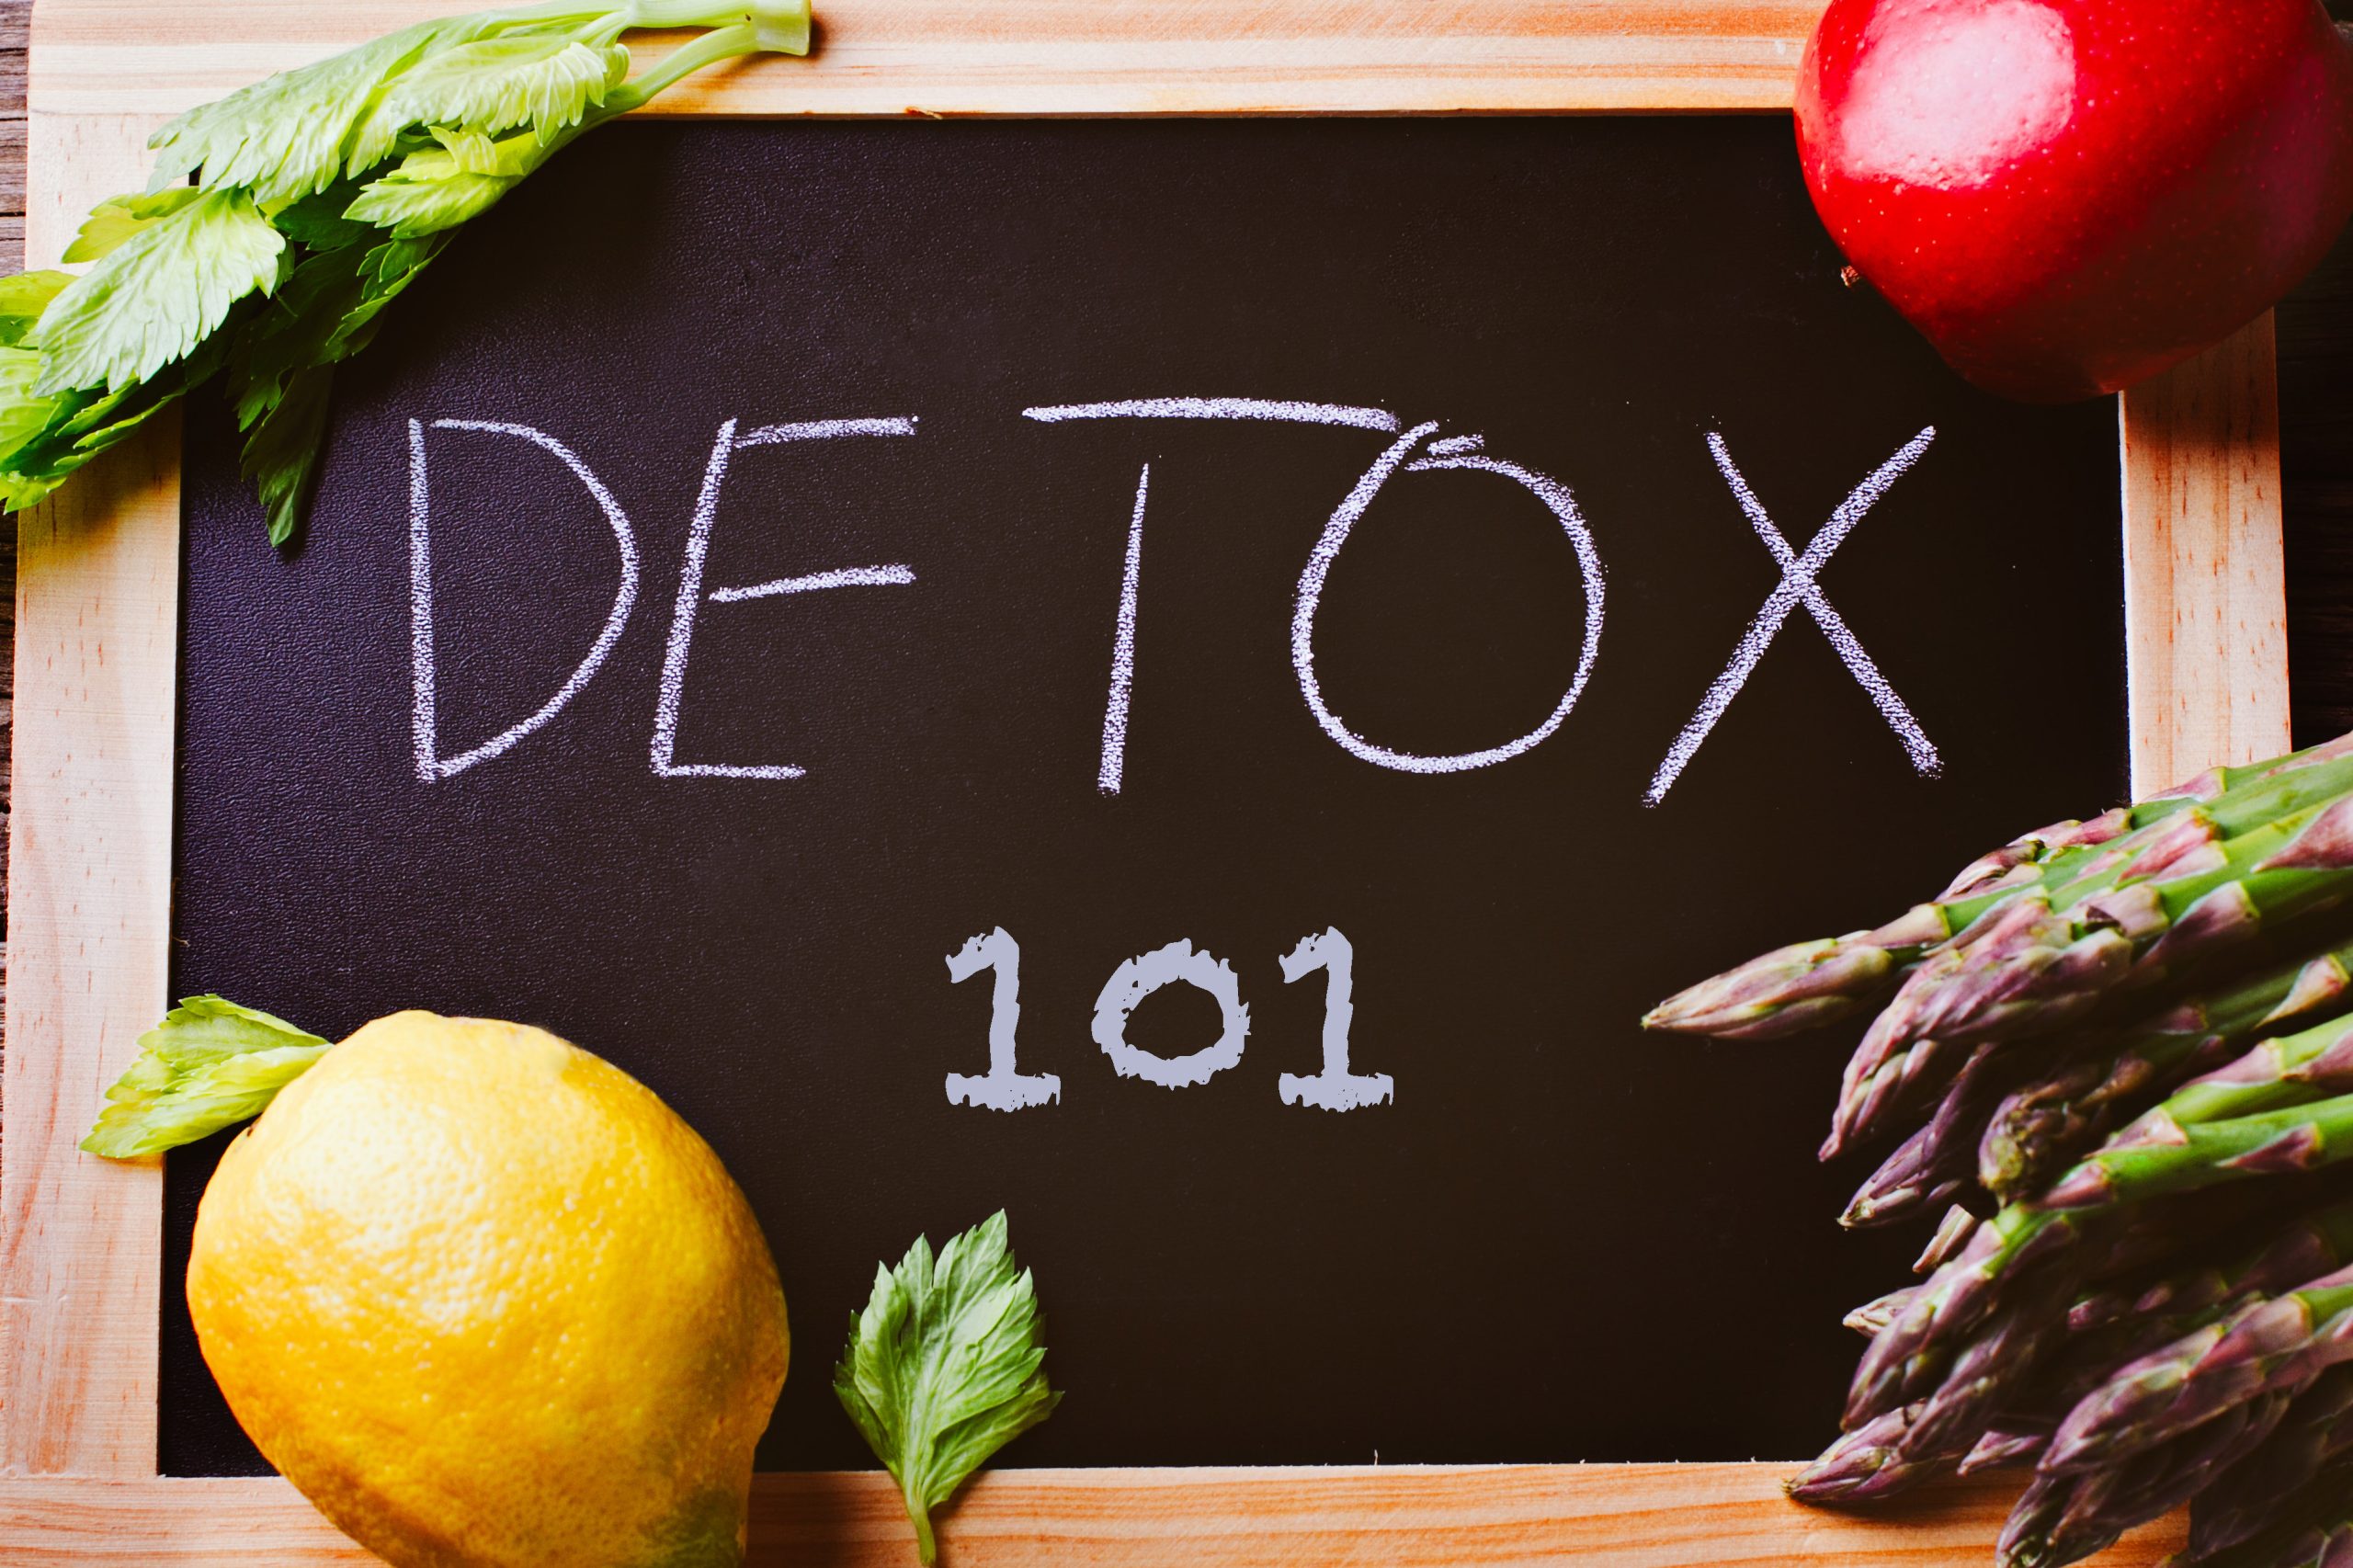 What is a detox and why should I do it?